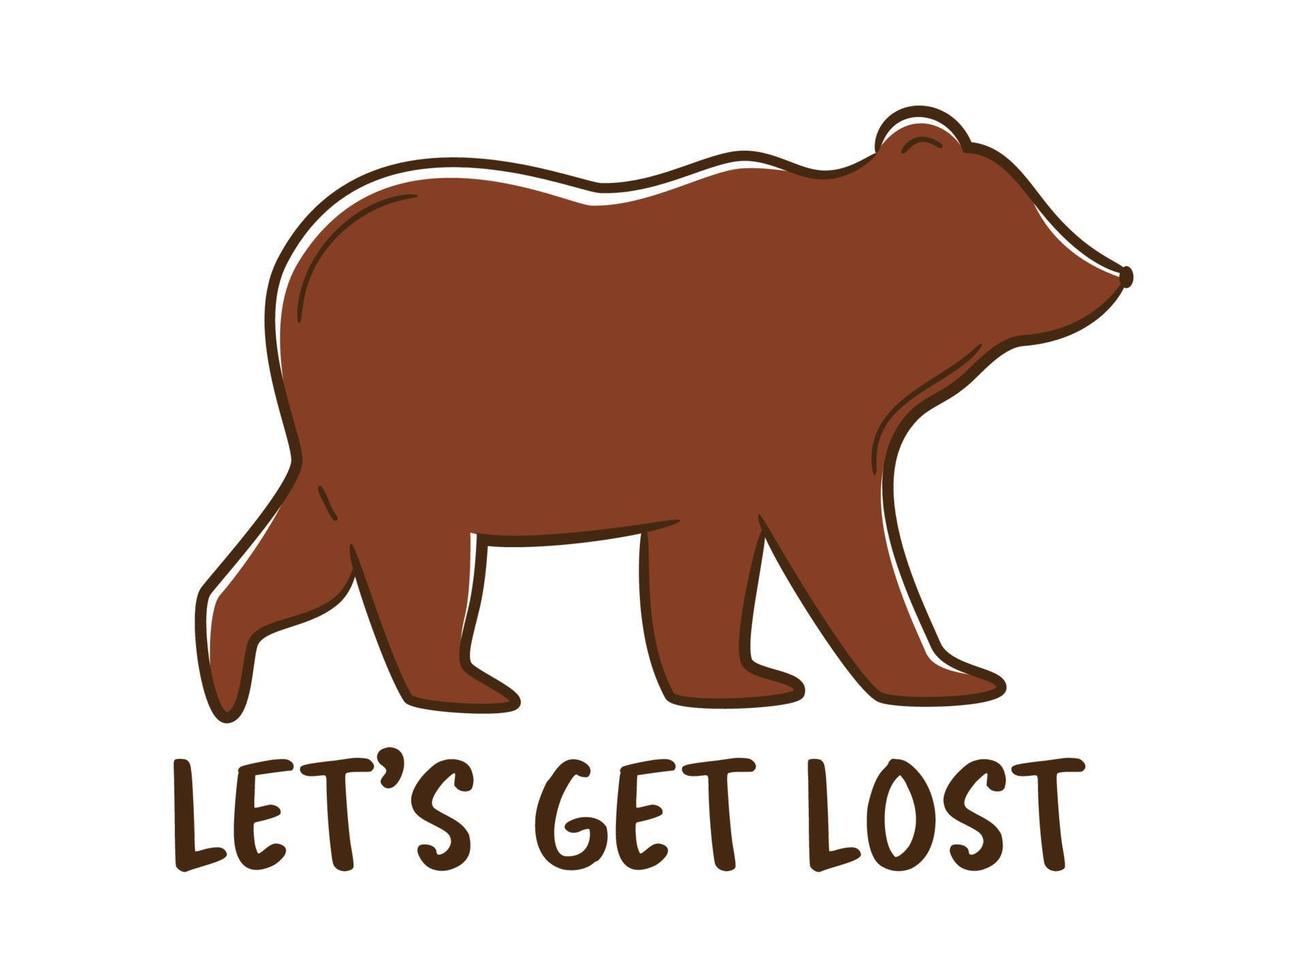 Adventures concept with bear and hand-lettering sign let's get lost vector